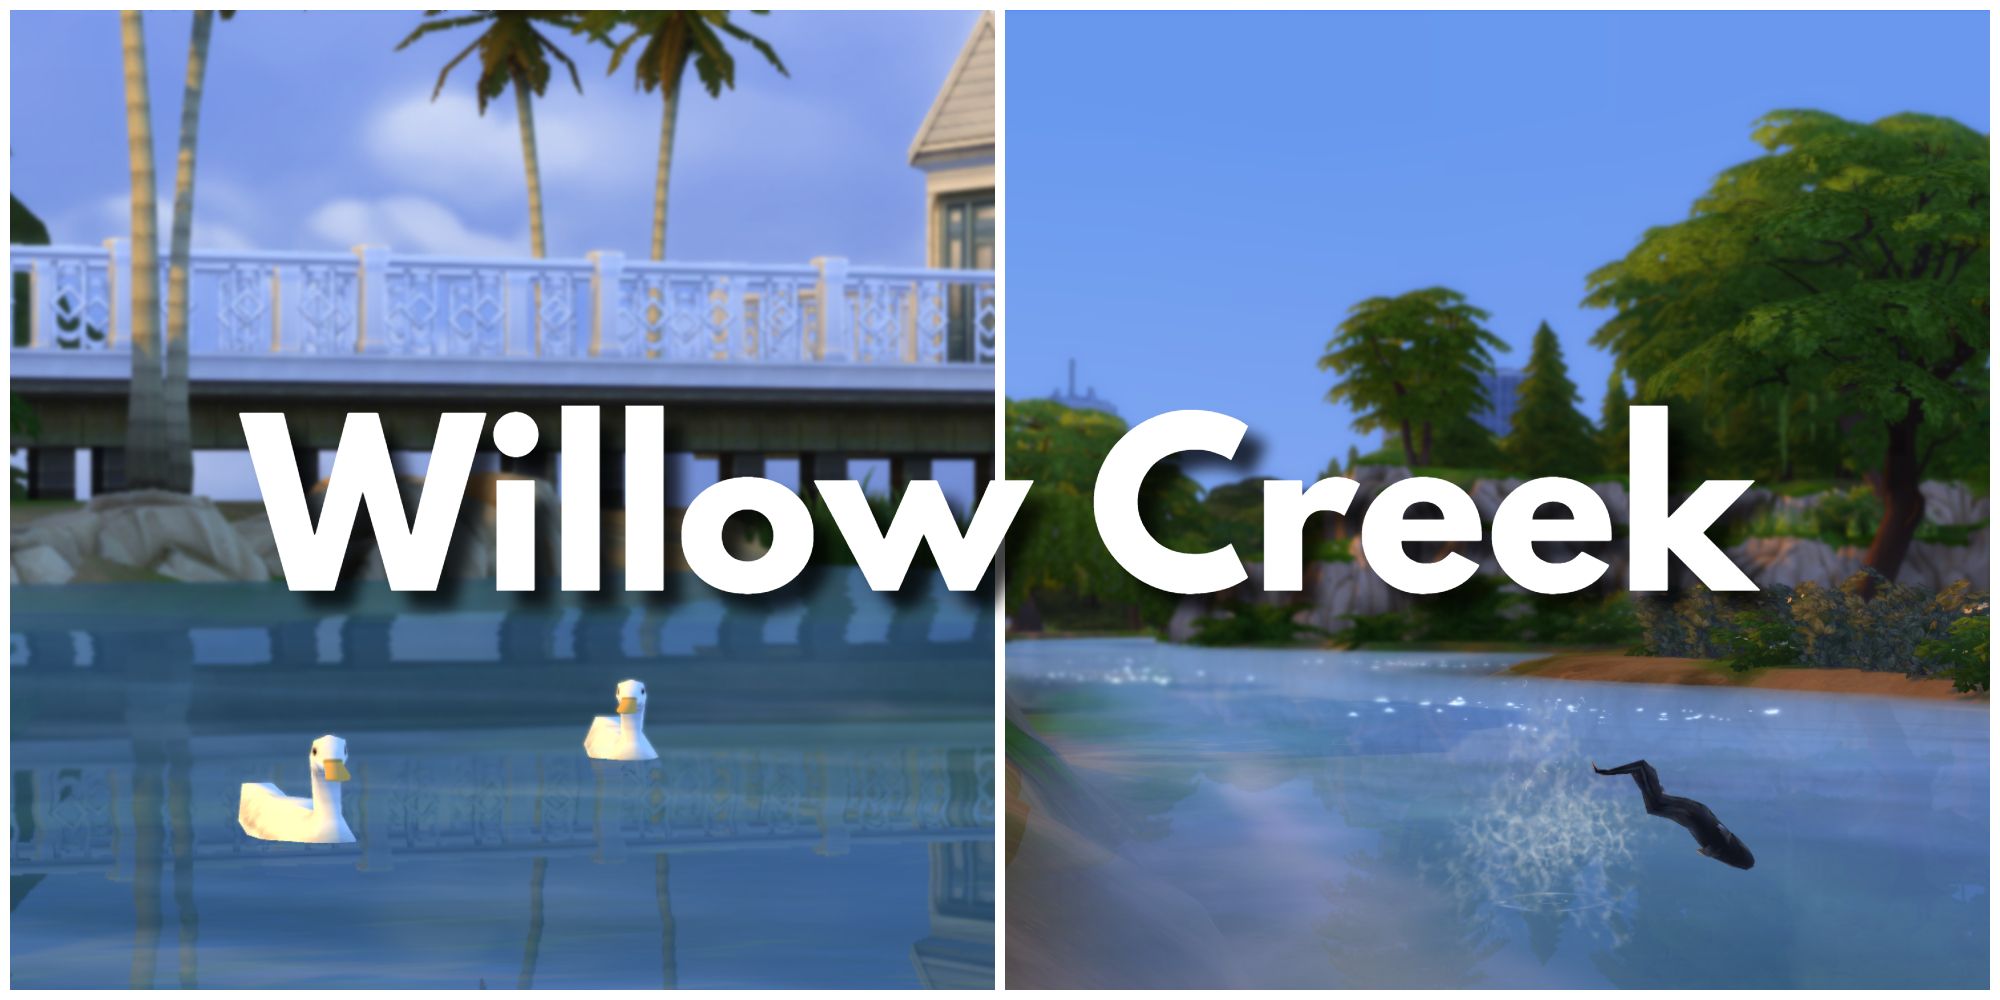 Although few, there are some animals in the base game world, Willow Creek, including ducks, fish, and frogs.